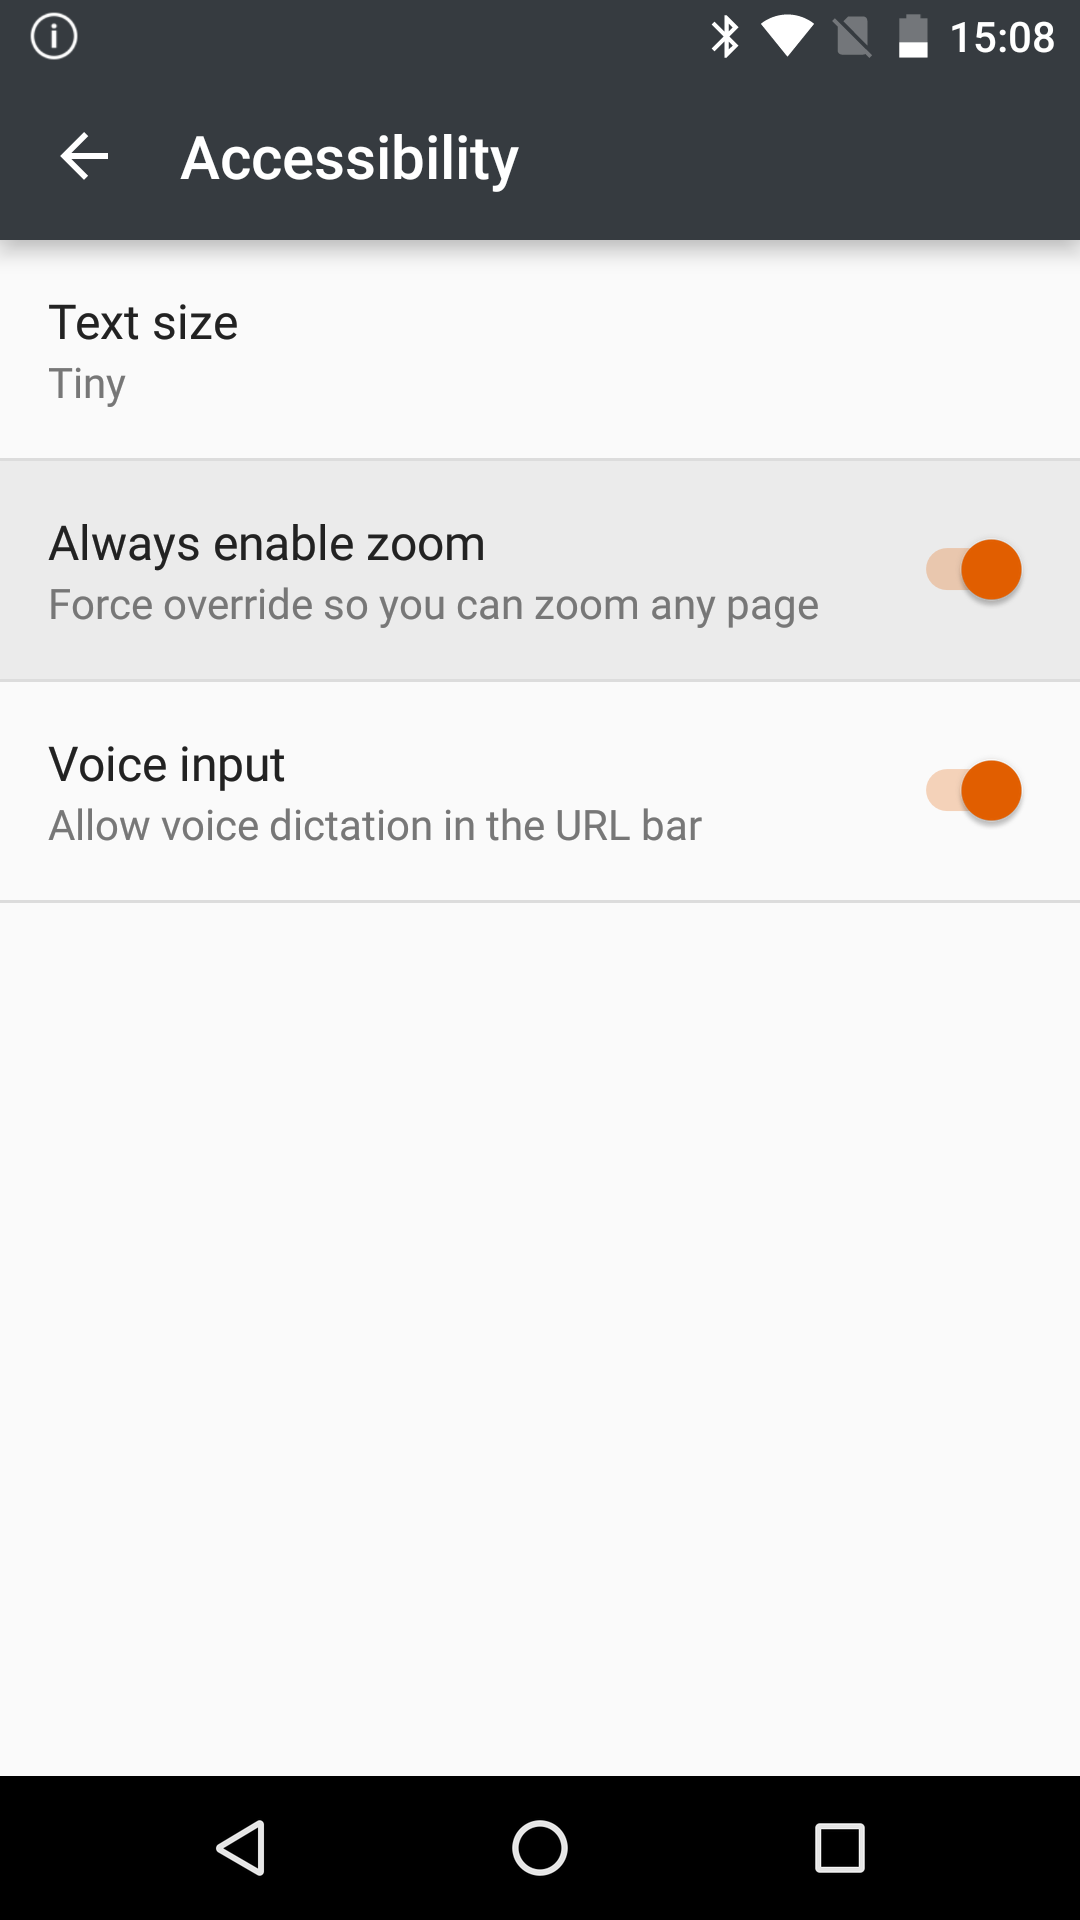 Firefox/Android's 'Always enable zoom' setting